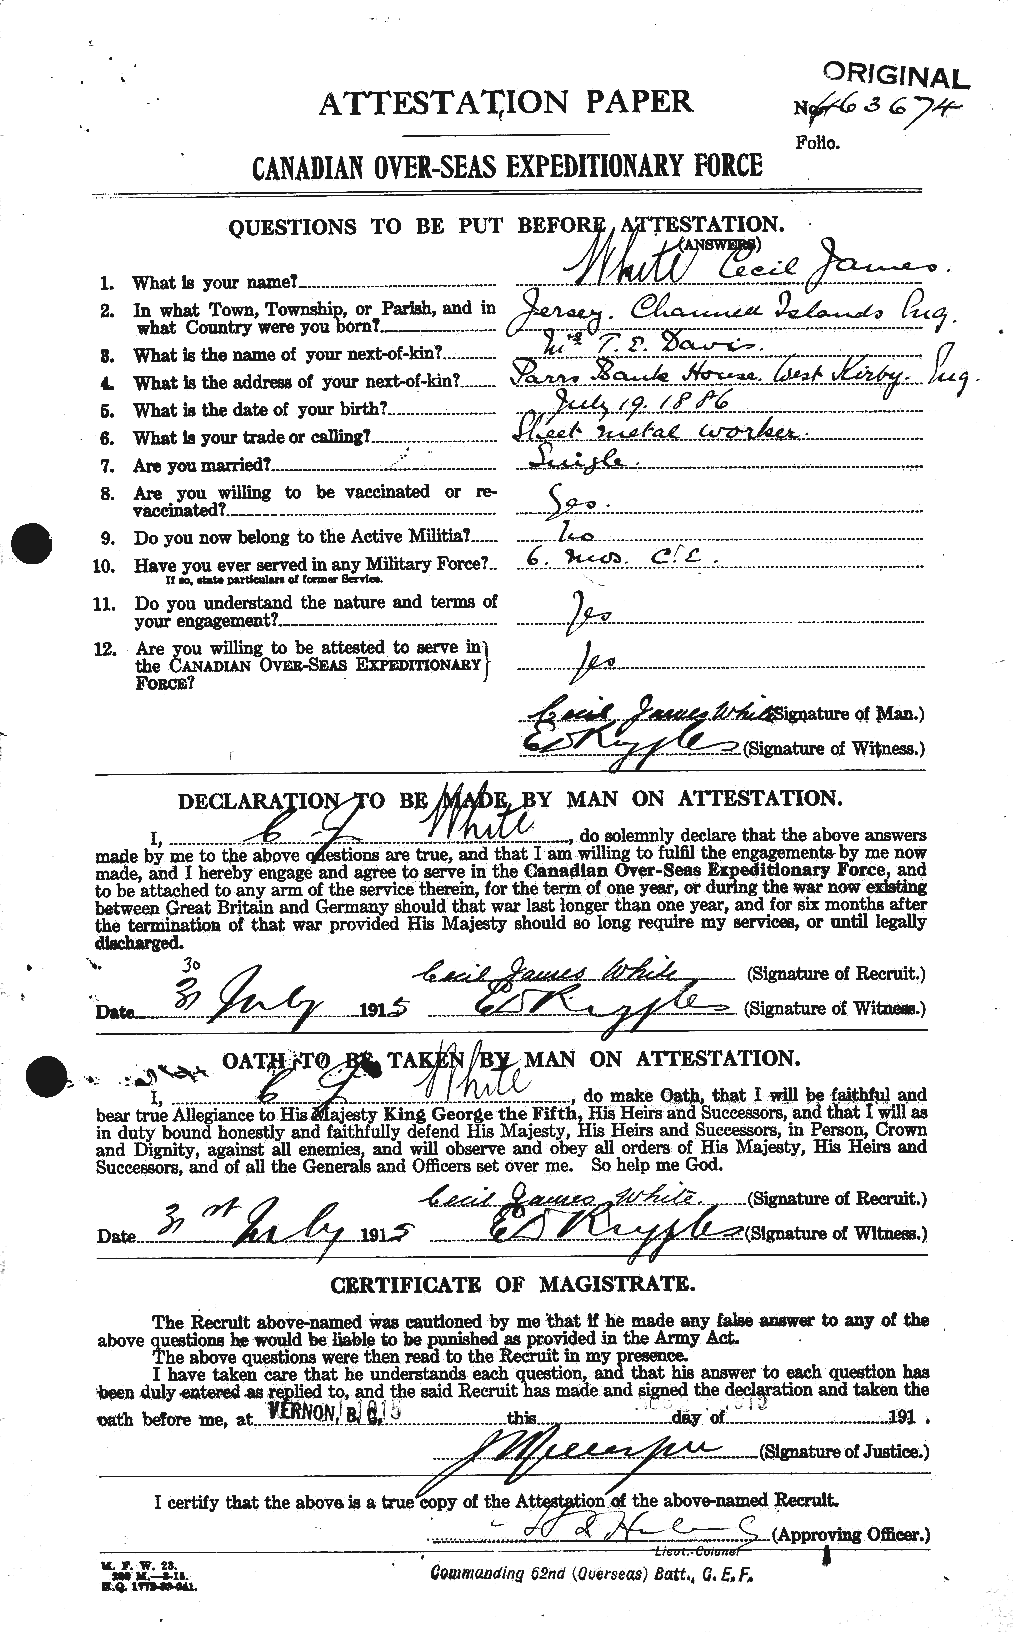 Personnel Records of the First World War - CEF 669891a